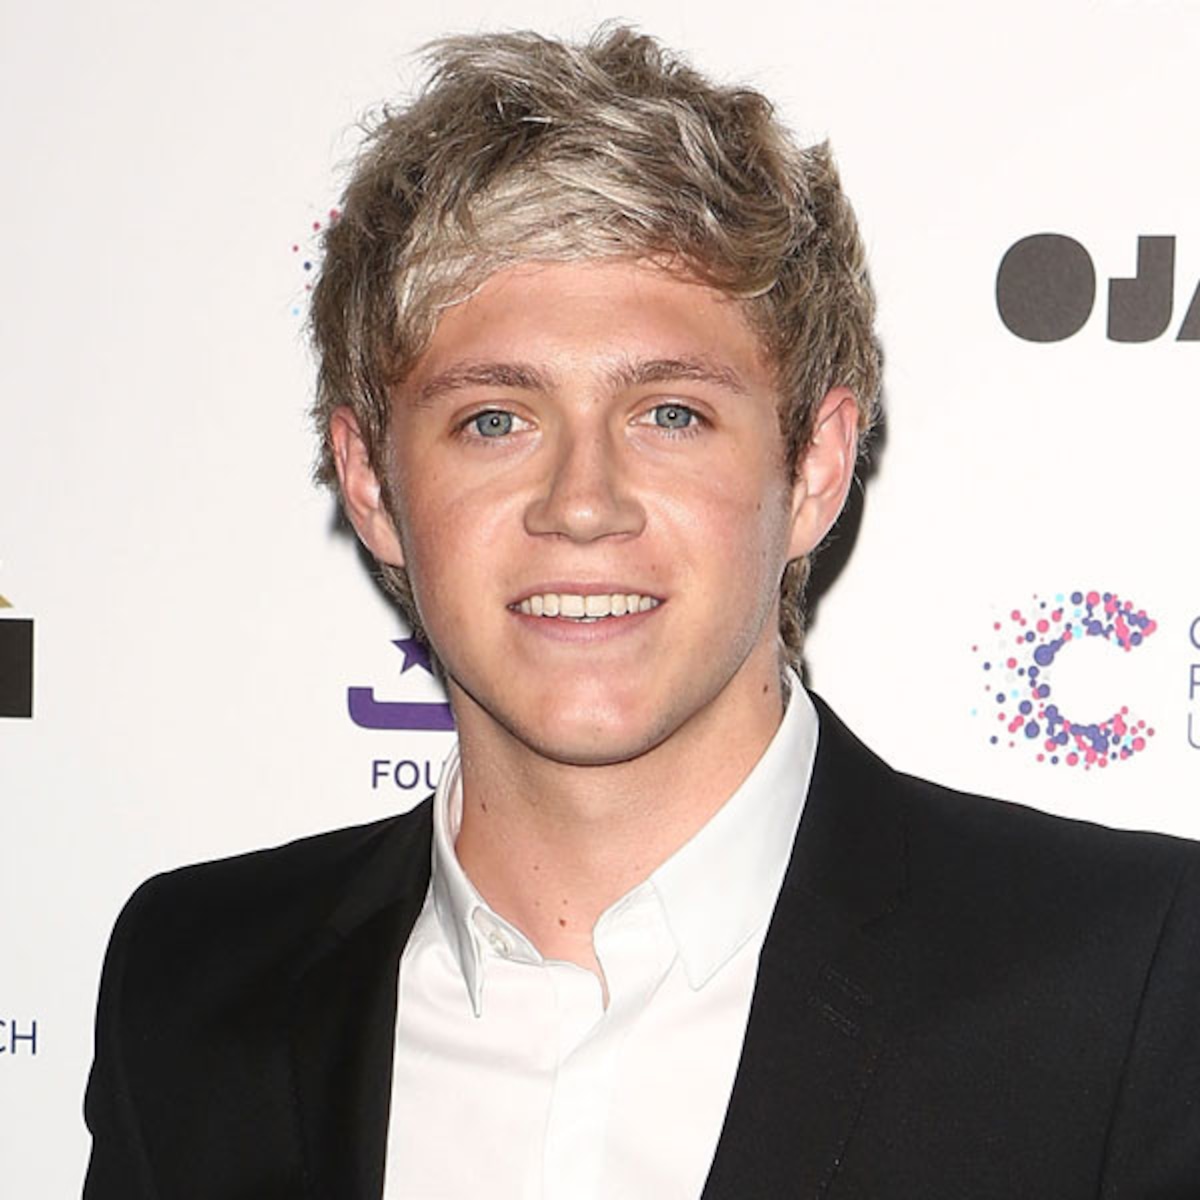 Niall Horan Tattoos His Butt With Comedian's Face! - E! Online